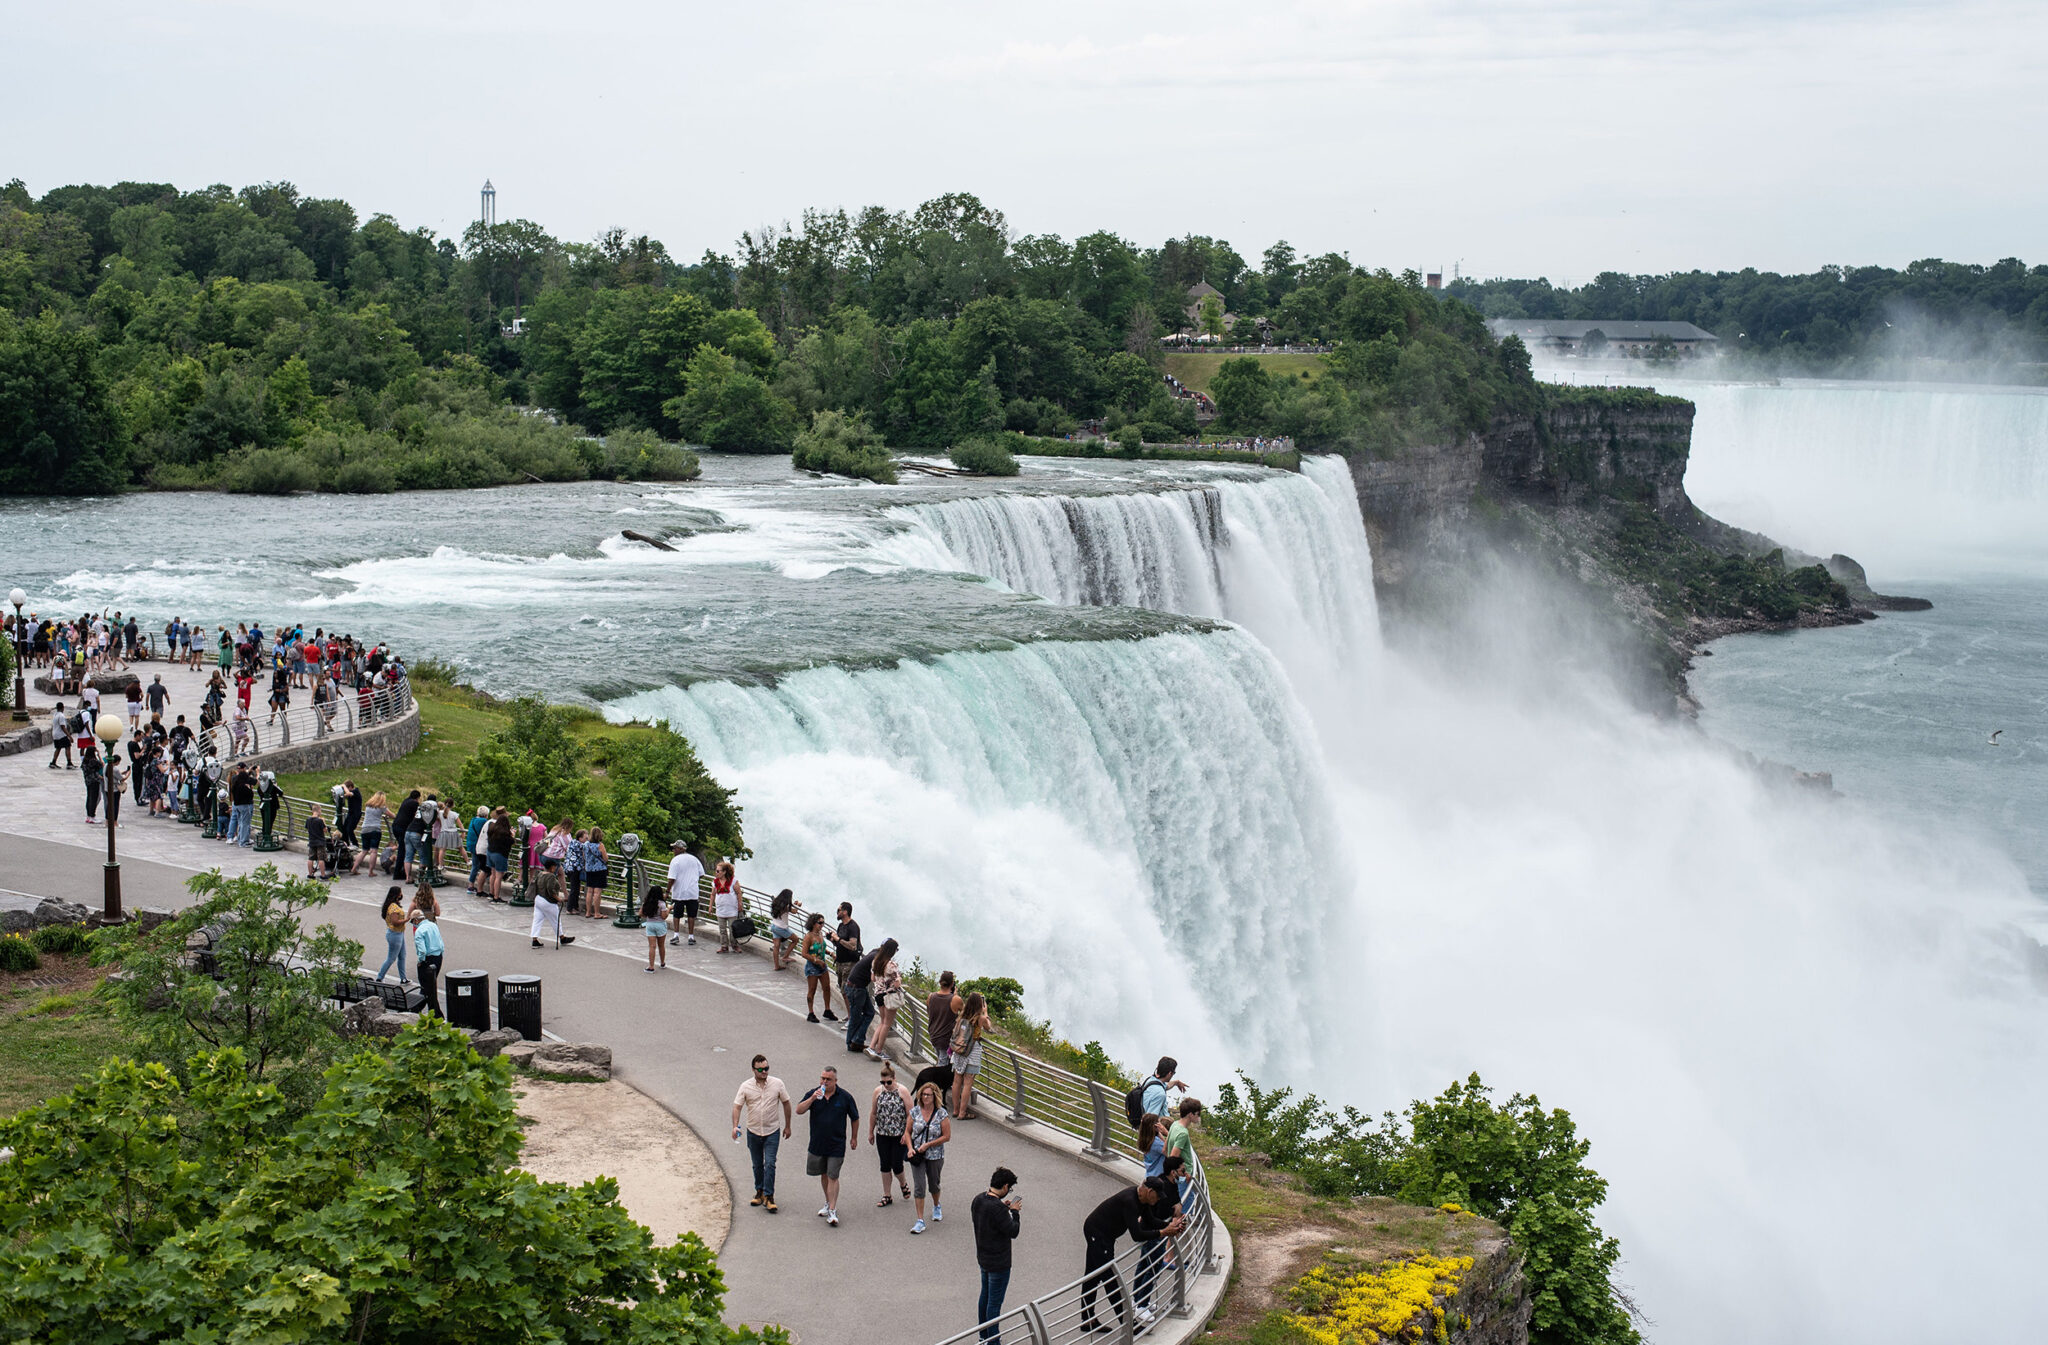 where is niagara falls located and is niagara falls in the united states or canada